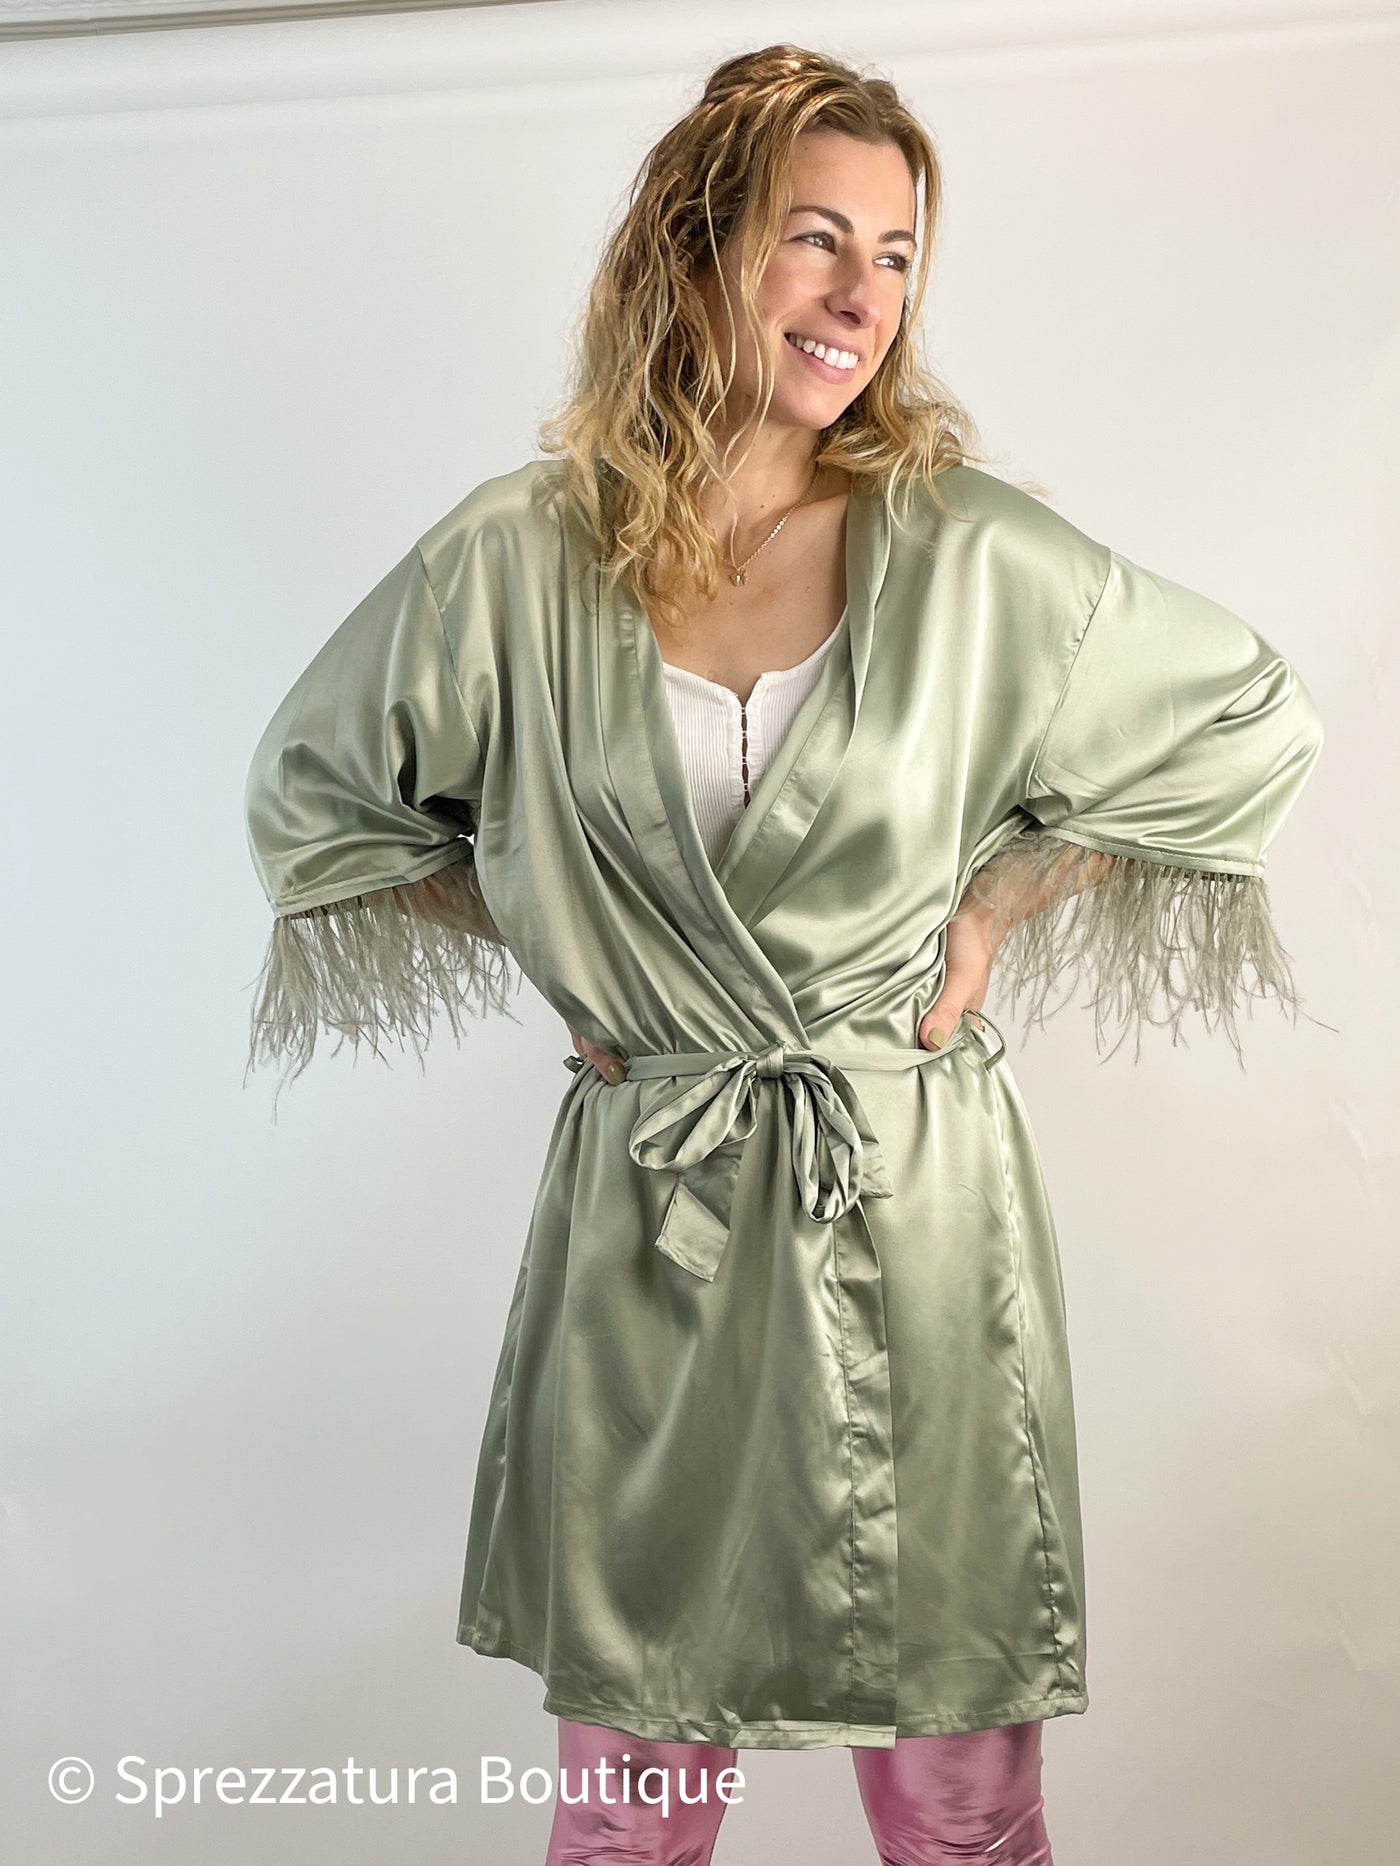 Sage green satin robe with feather fringe sleeves womens pajamas robe kimono stylish trendy chic classic elegant gift holiday christmas for her Modern smart causal female chic effortless outfit womens ladies gift elegant effortless clothing clothes apparel outfits chic fall winter style women’s boutique trendy teacher office cute outfit boutique clothes fashion work from home lounge athleisure plus size midsize curvy